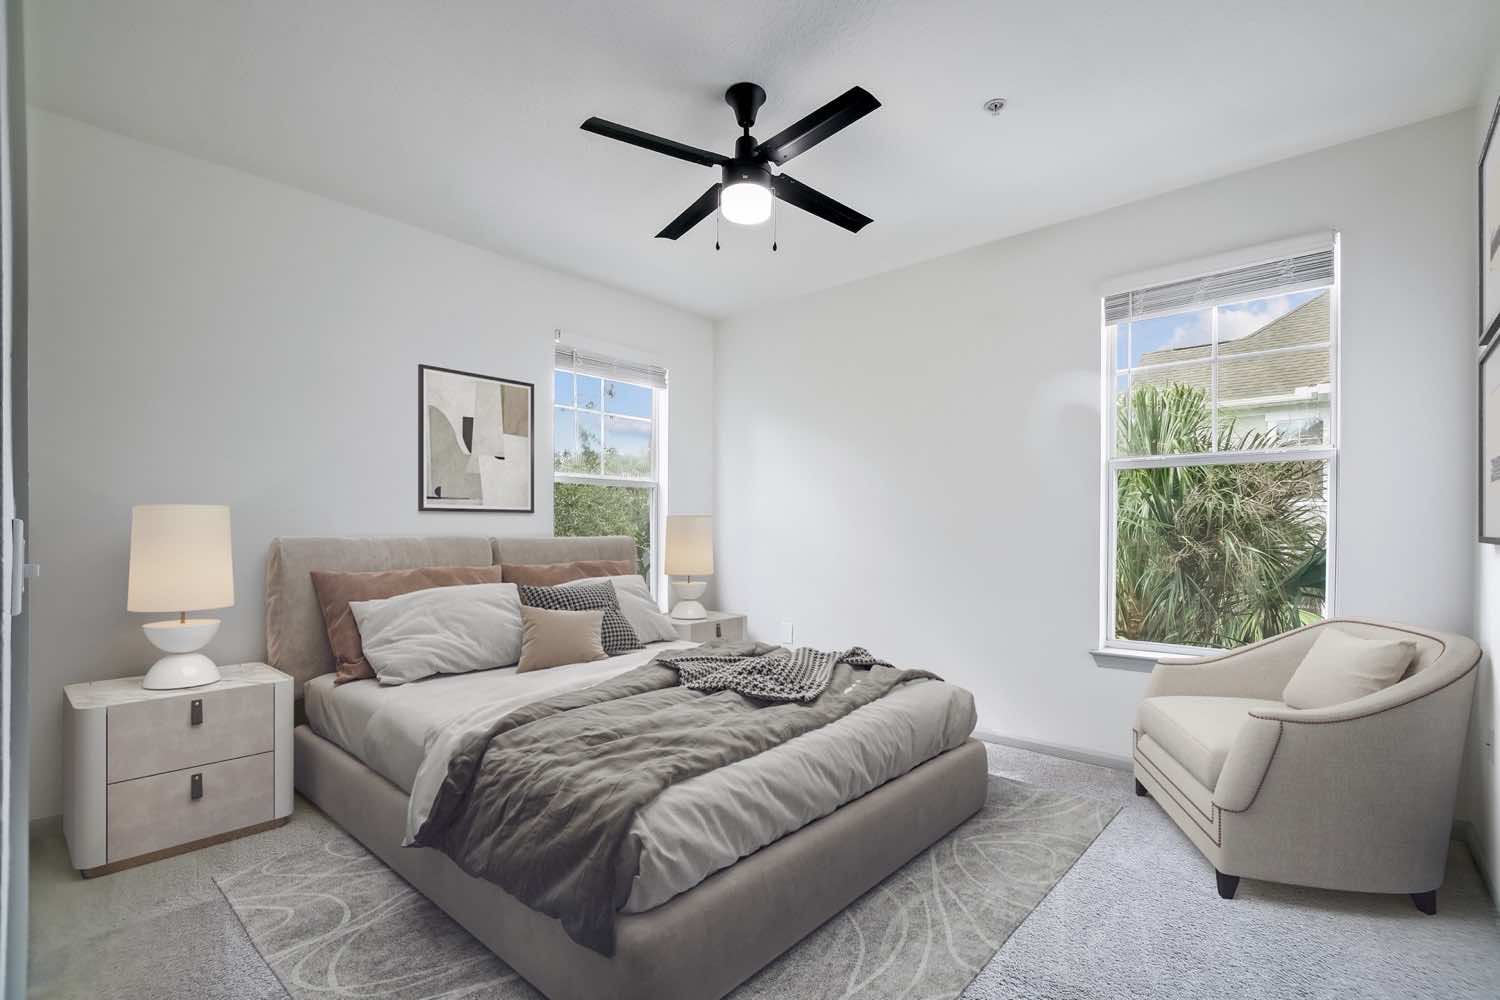 bedroom with plush carpeting and ceiling fan